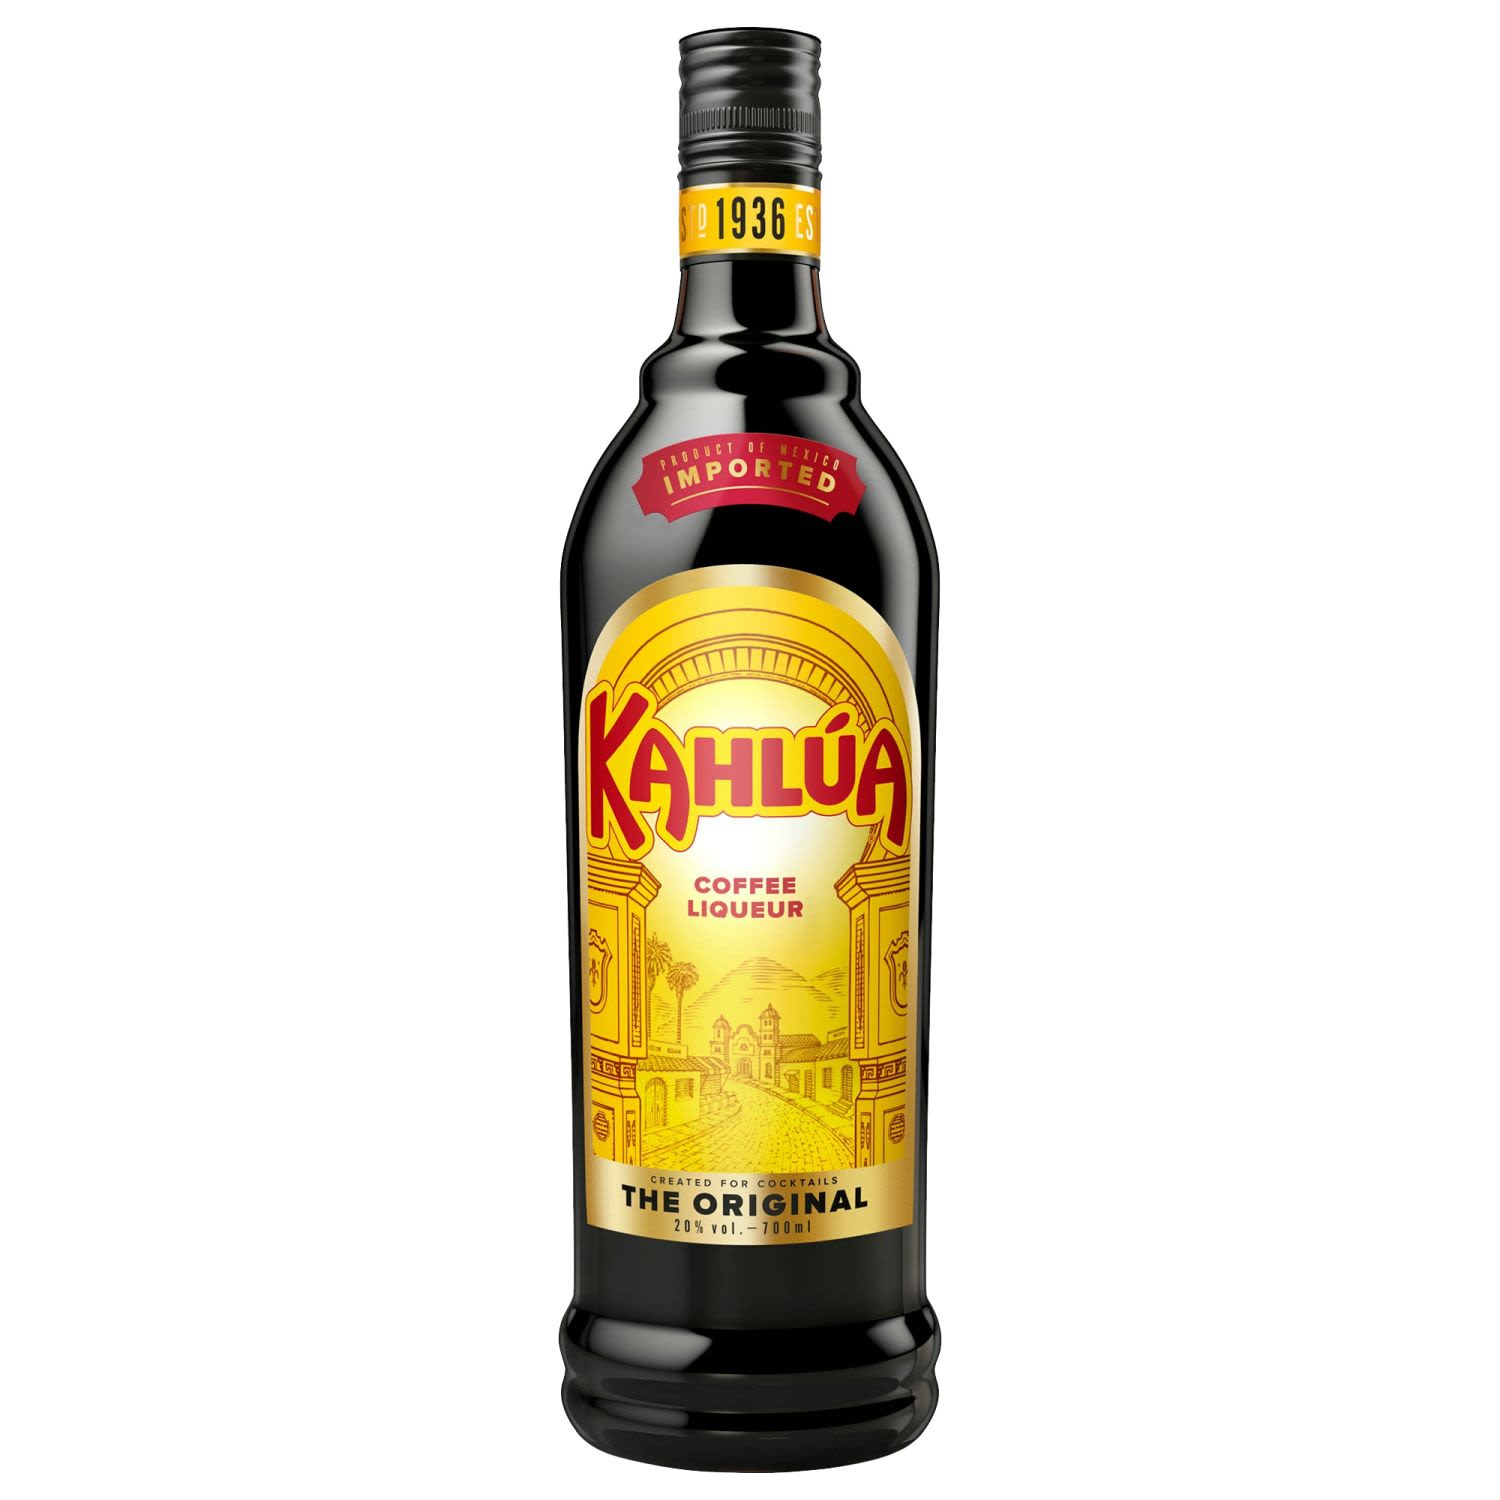 Originating deep in the Yukatan, Kahlua has a flavour as rich and distinct as the region. Kahlua has a vibrant taste and lingering coffee finish. It can be served neat over ice or mixed with milk or cola, and is often used in a variety of cocktails.<br /> <br />Alcohol Volume: 20.00%<br /><br />Pack Format: Bottle<br /><br />Standard Drinks: 11</br /><br />Pack Type: Bottle<br /><br />Country of Origin: Mexico<br />